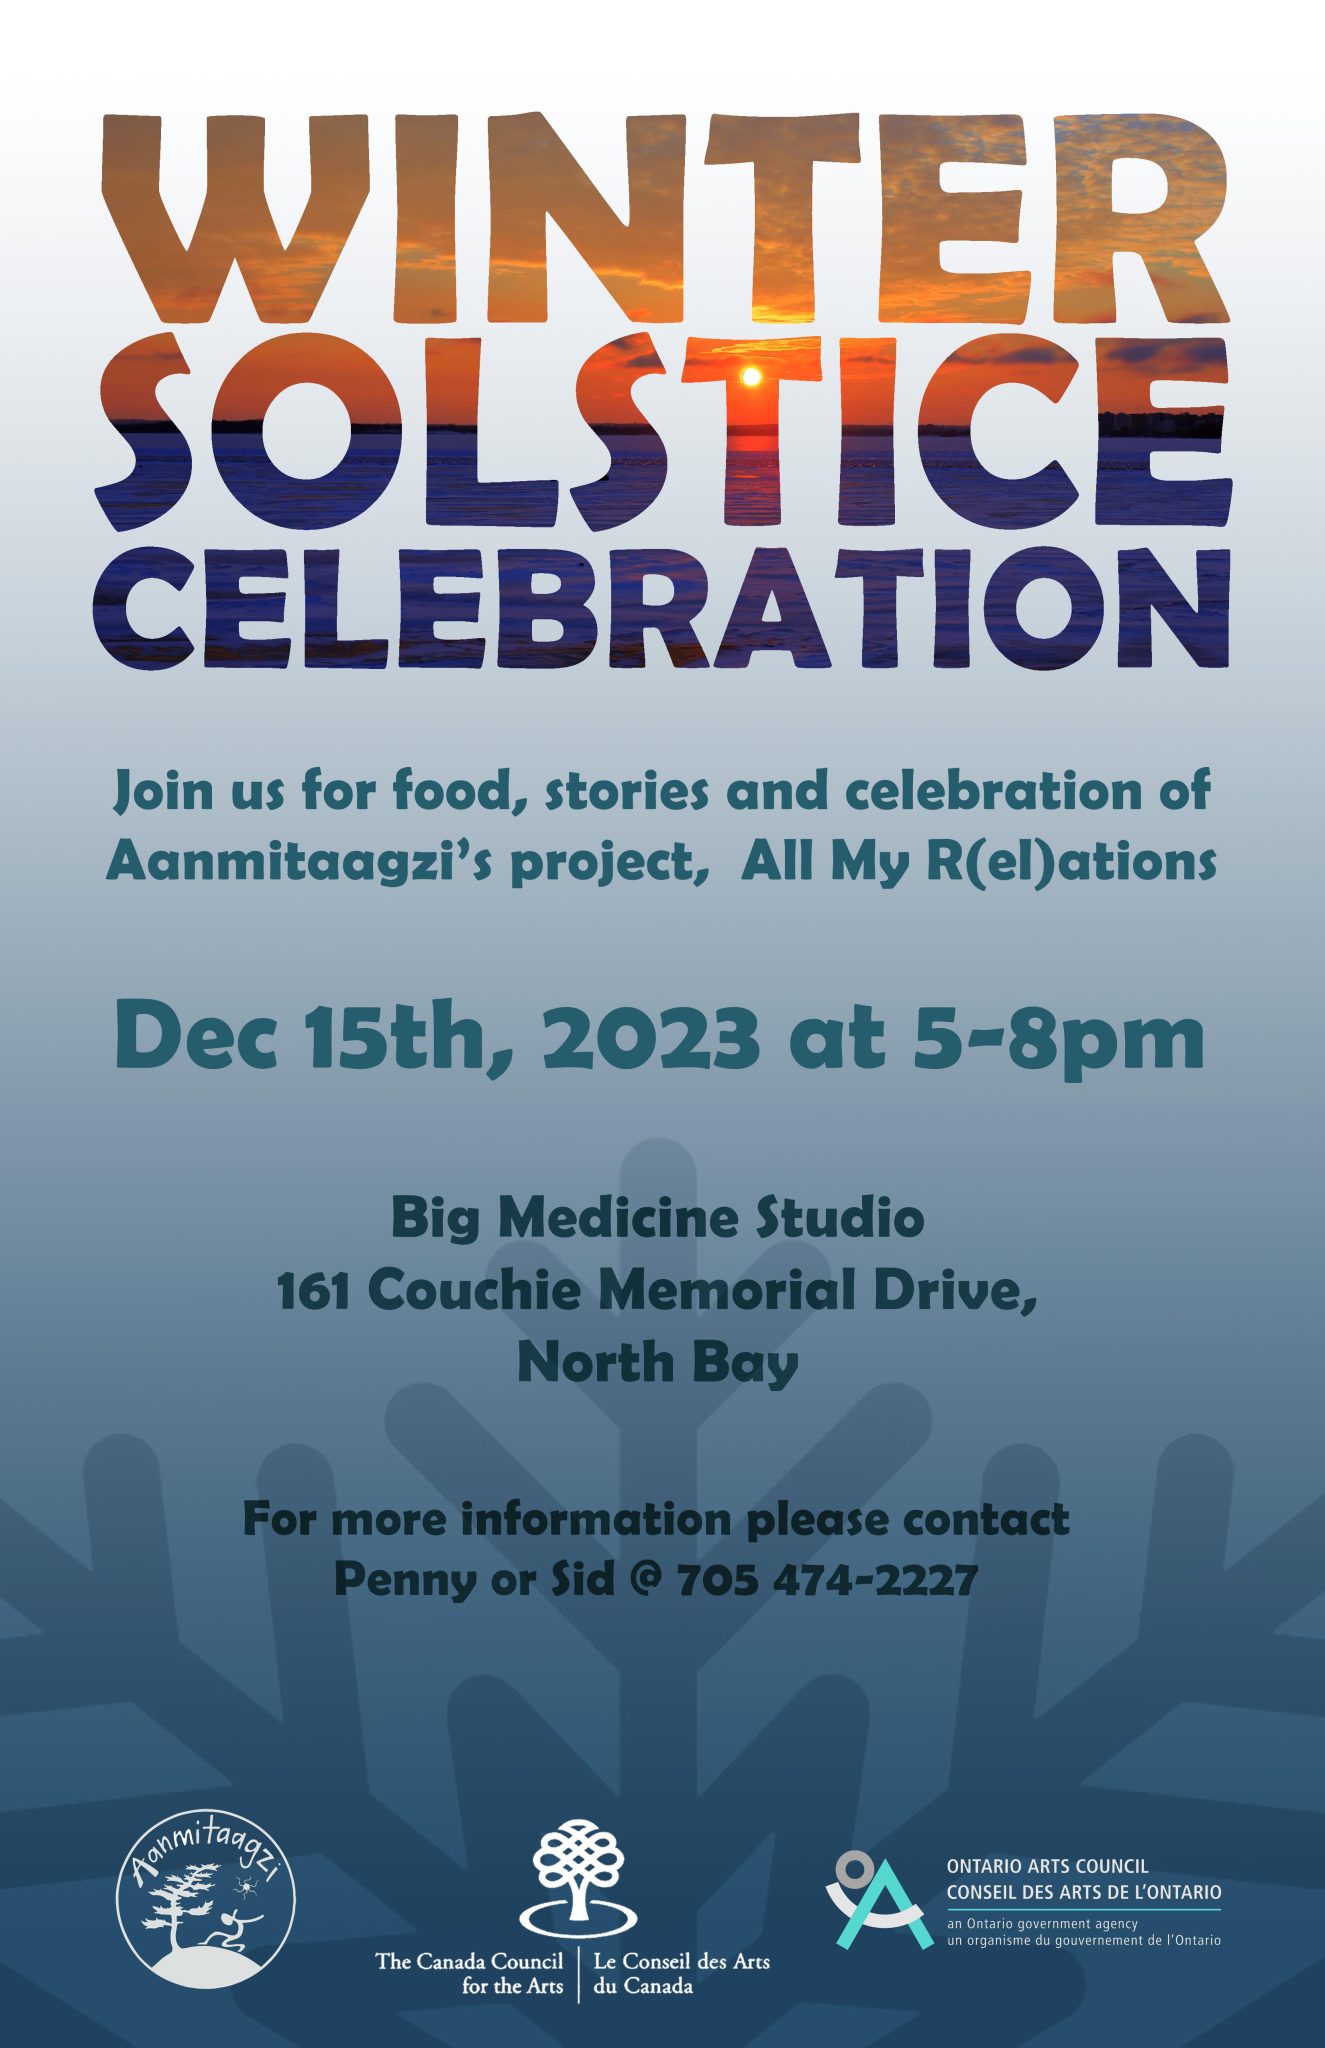 Poster for the 2023 Winter Solstice celebration.